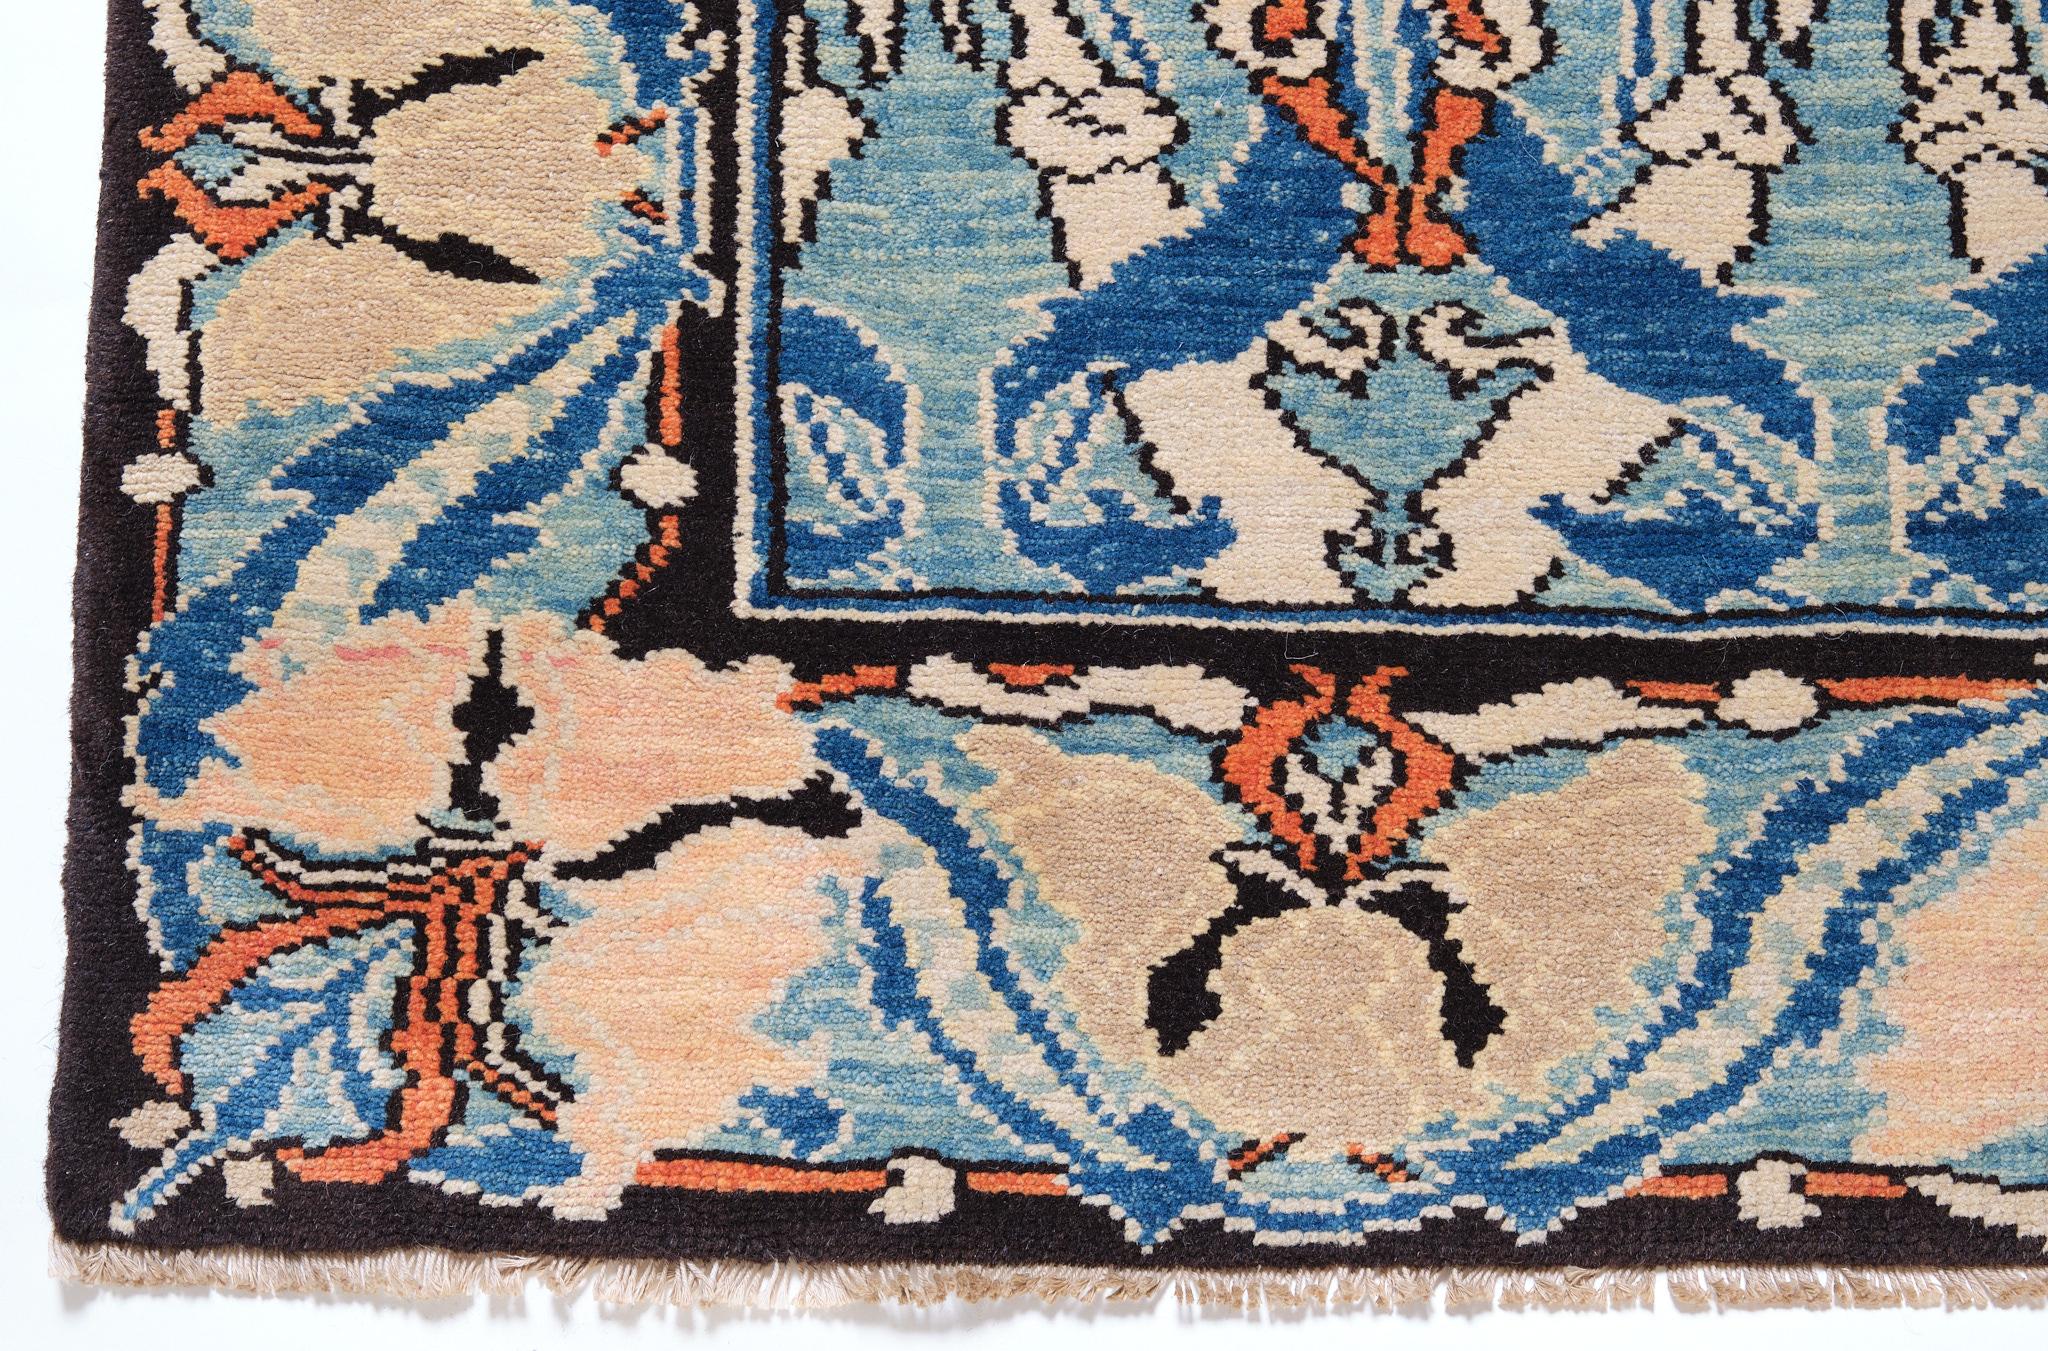 The source of carpet comes from the book Arts & Crafts Carpets, by Malcolm Haslam, and David Black, in 1991. This carpet is interpreted by our designers with William Morris designs in the 1880s – in the United Kingdom. In 1887 English artist and